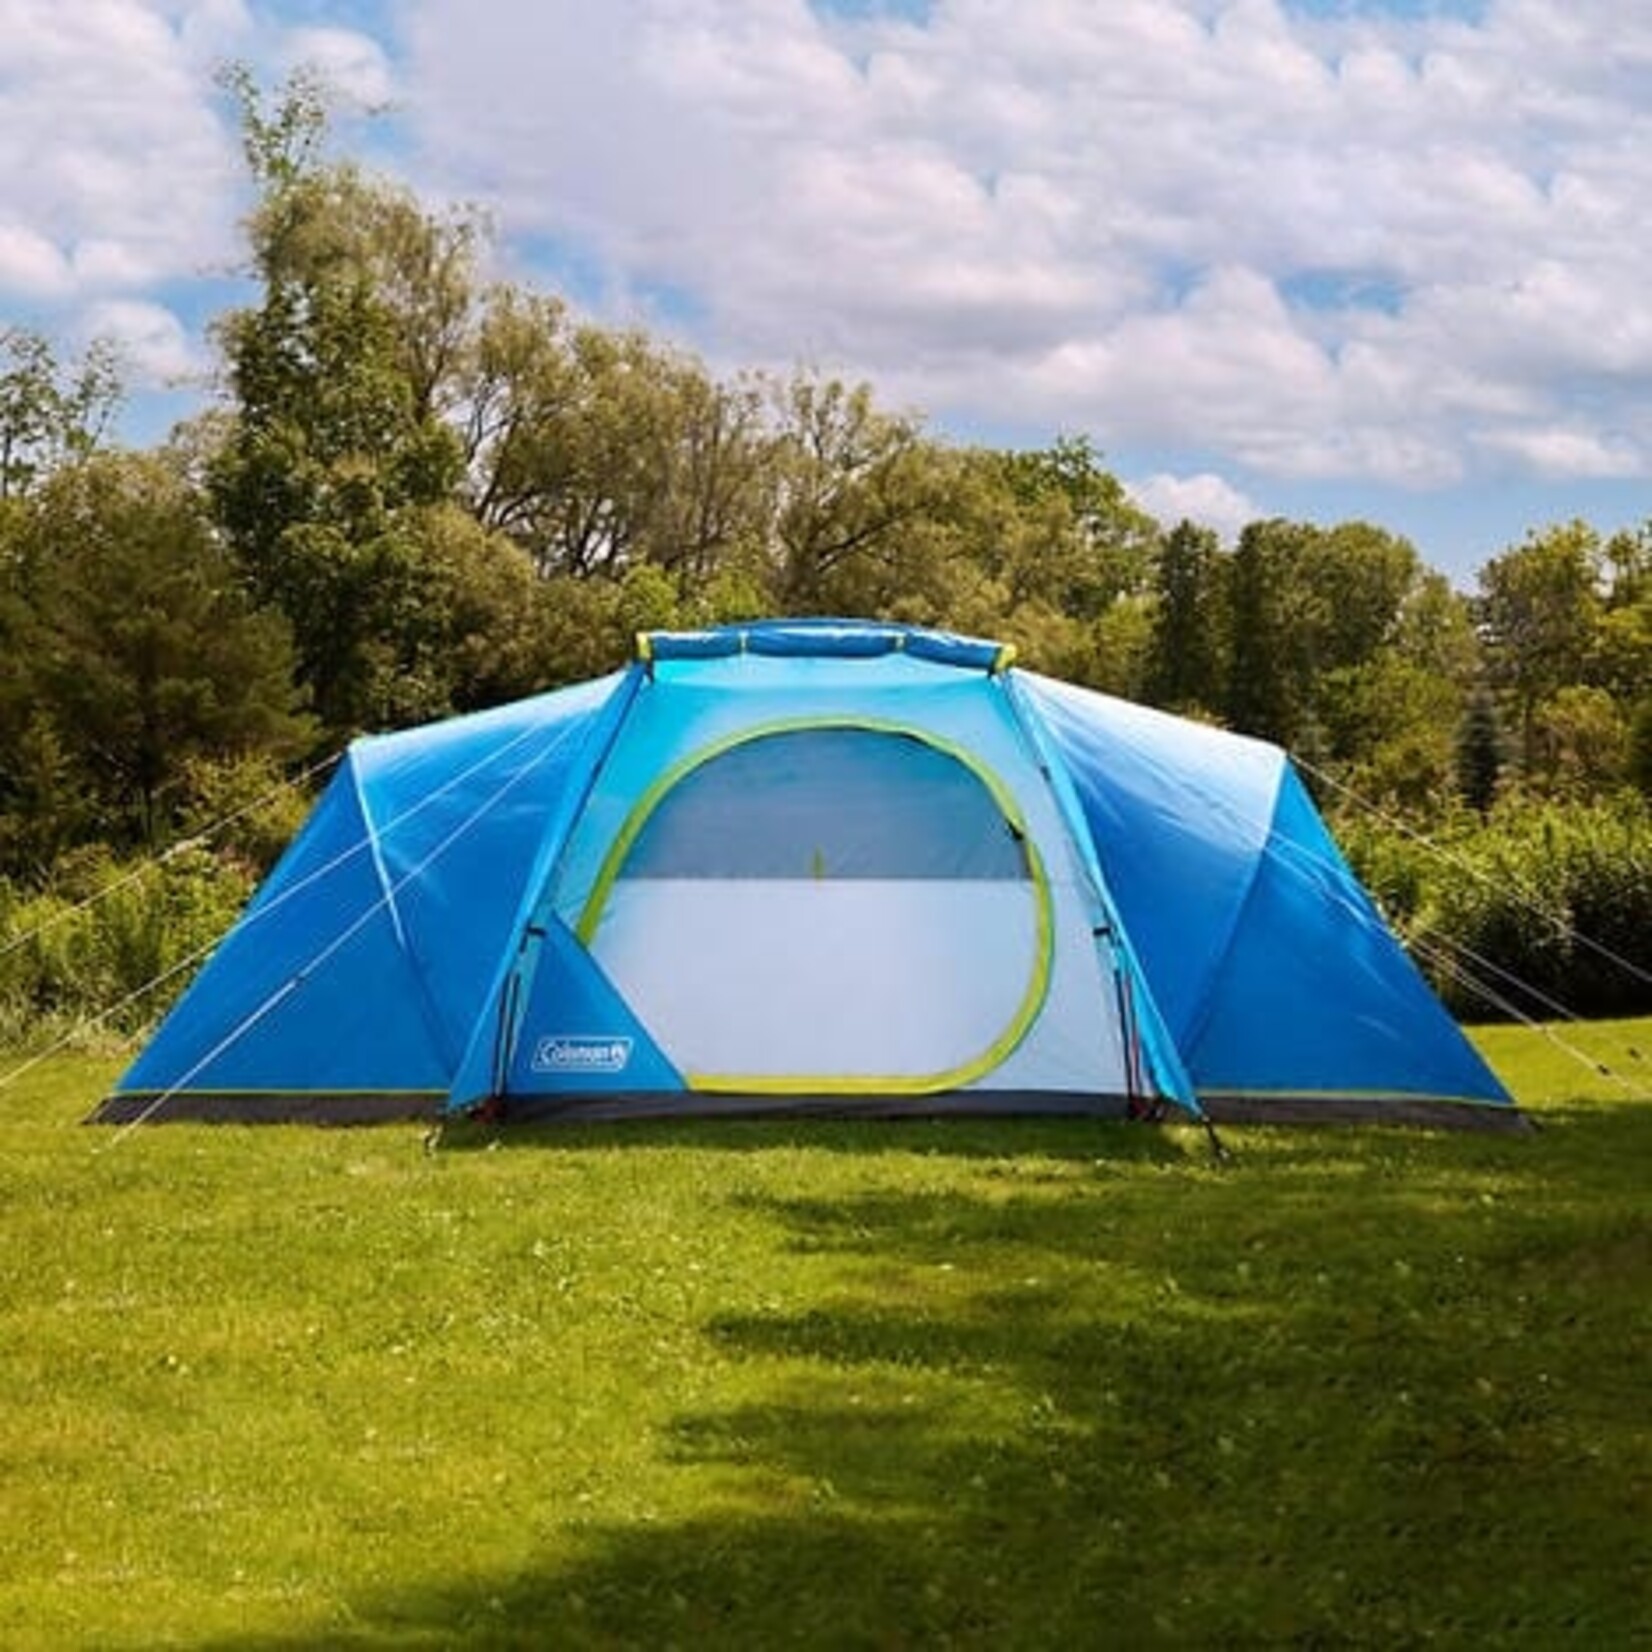 Coleman - Skydome XL Tent - 8 person